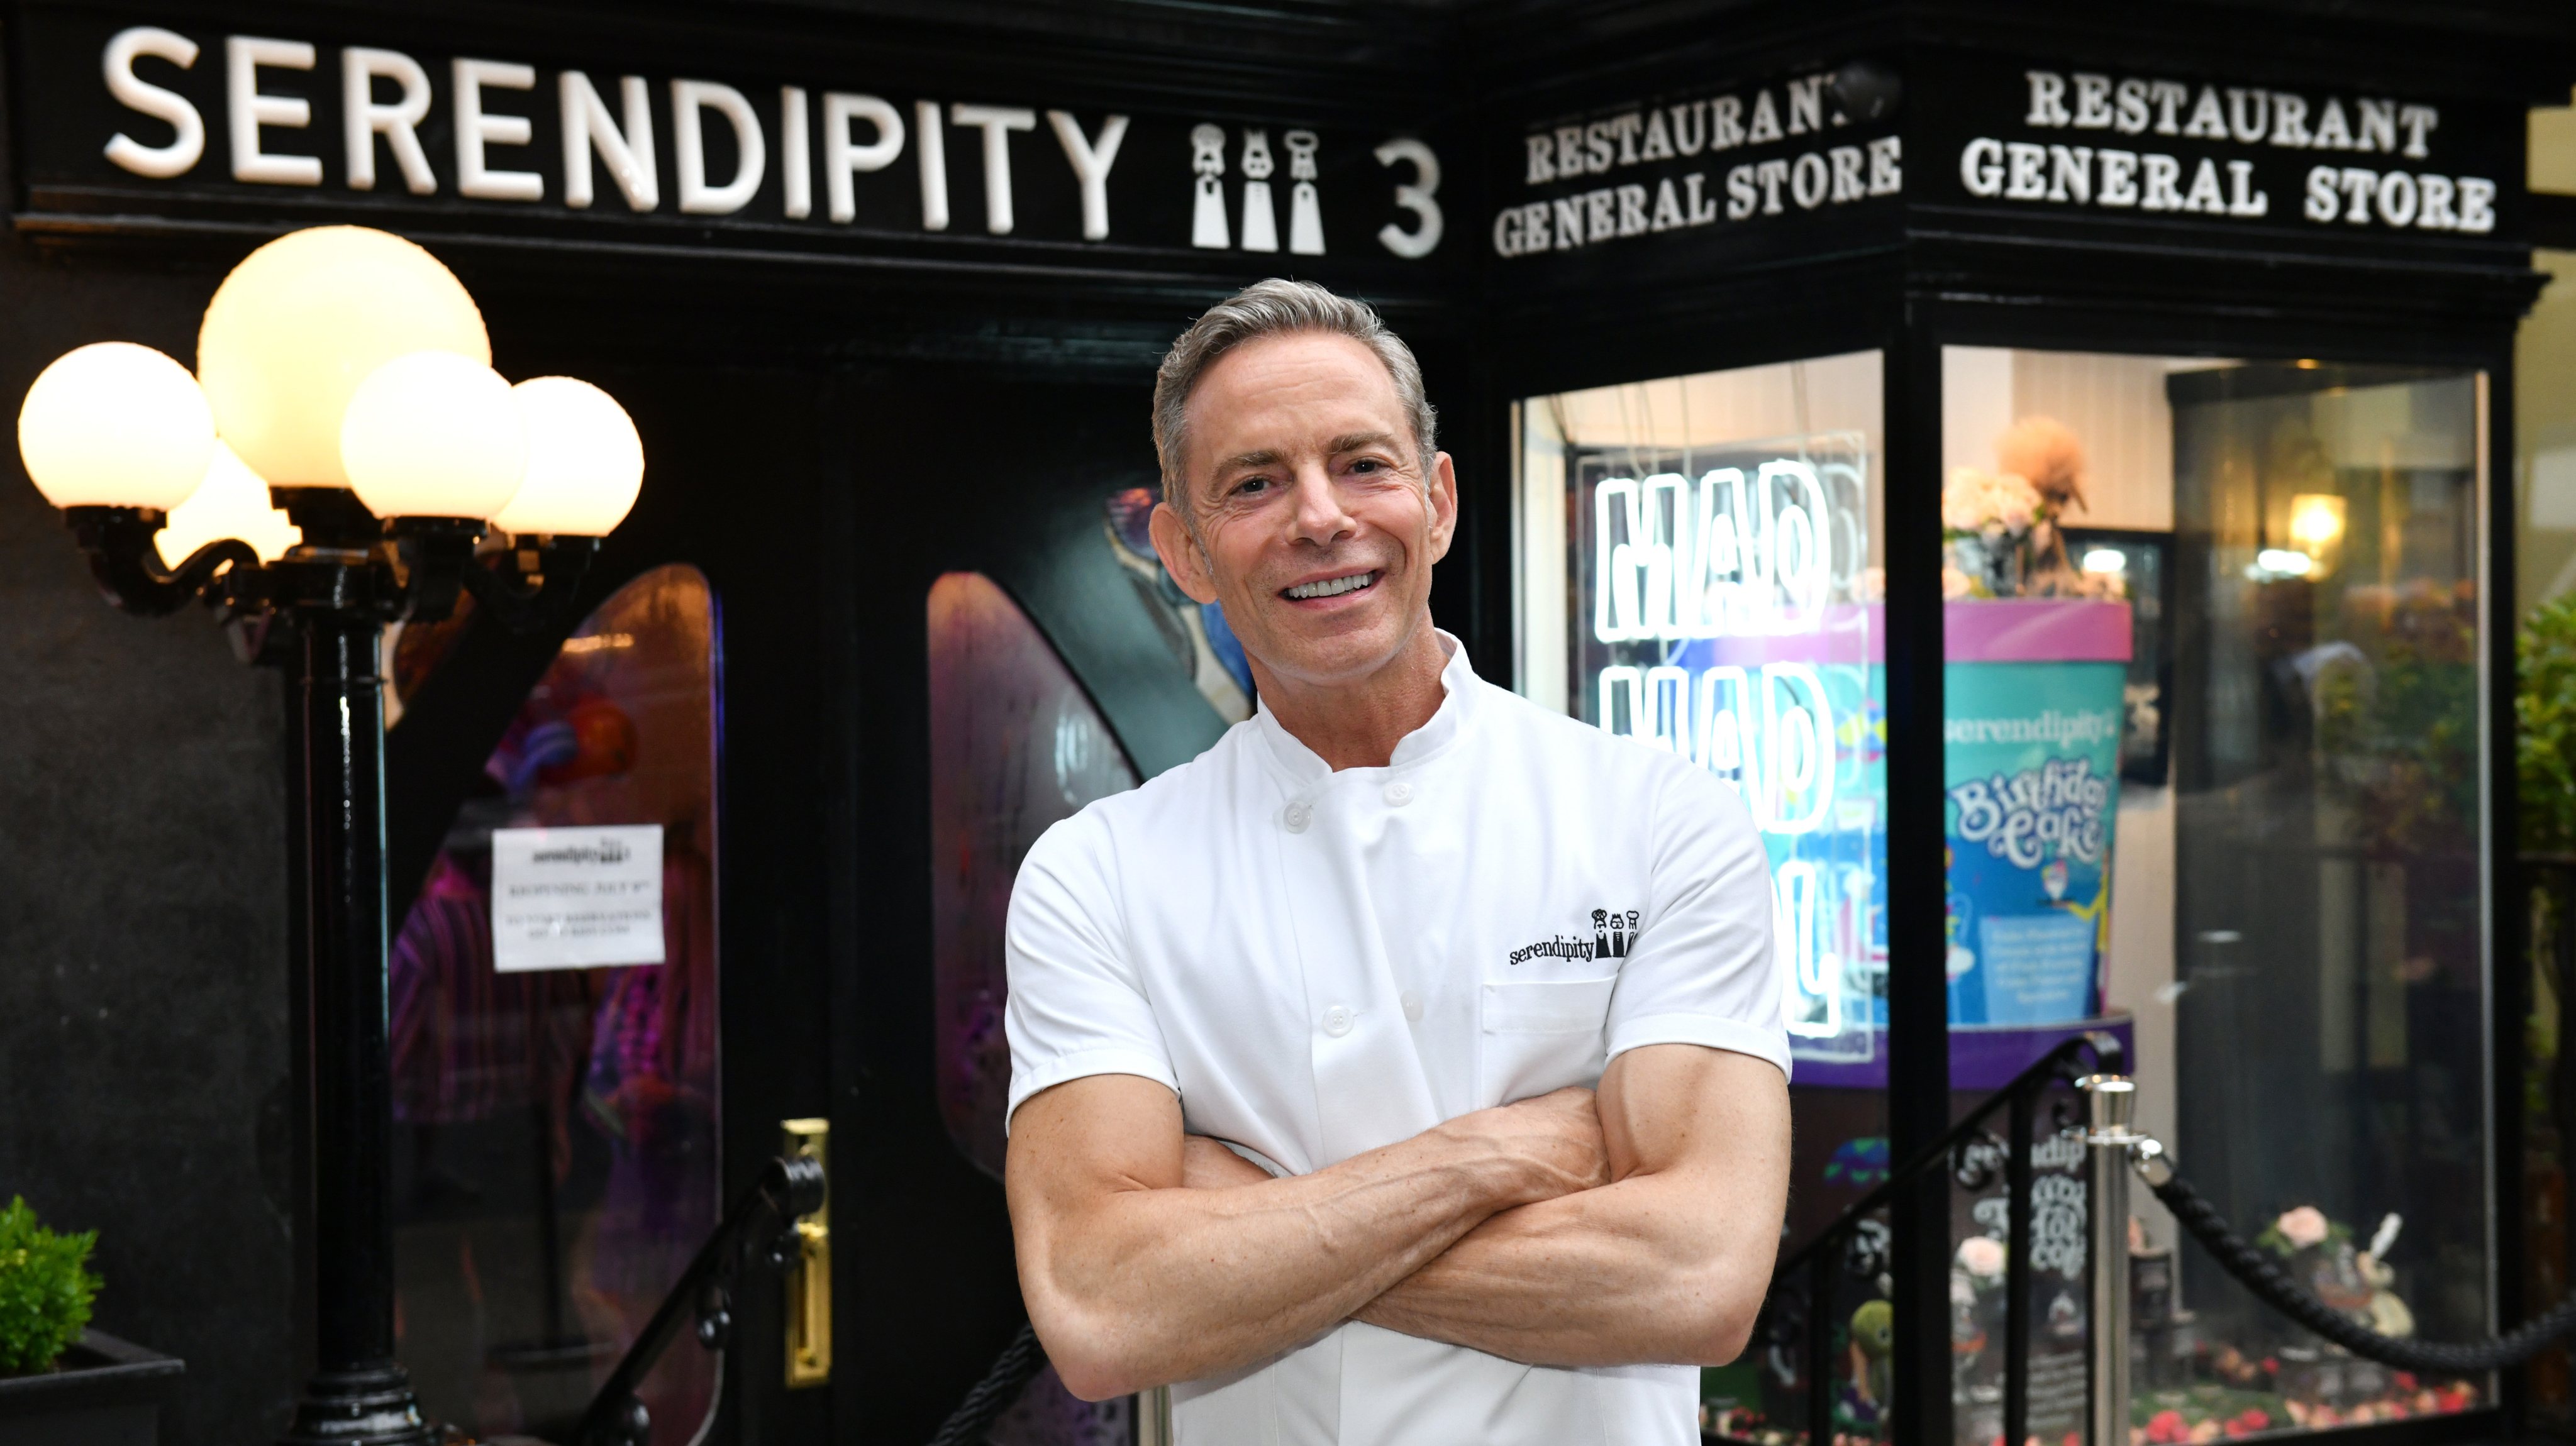 Serendipity3 Hosts A Preview Night Ahead Of Its Grand Reopening